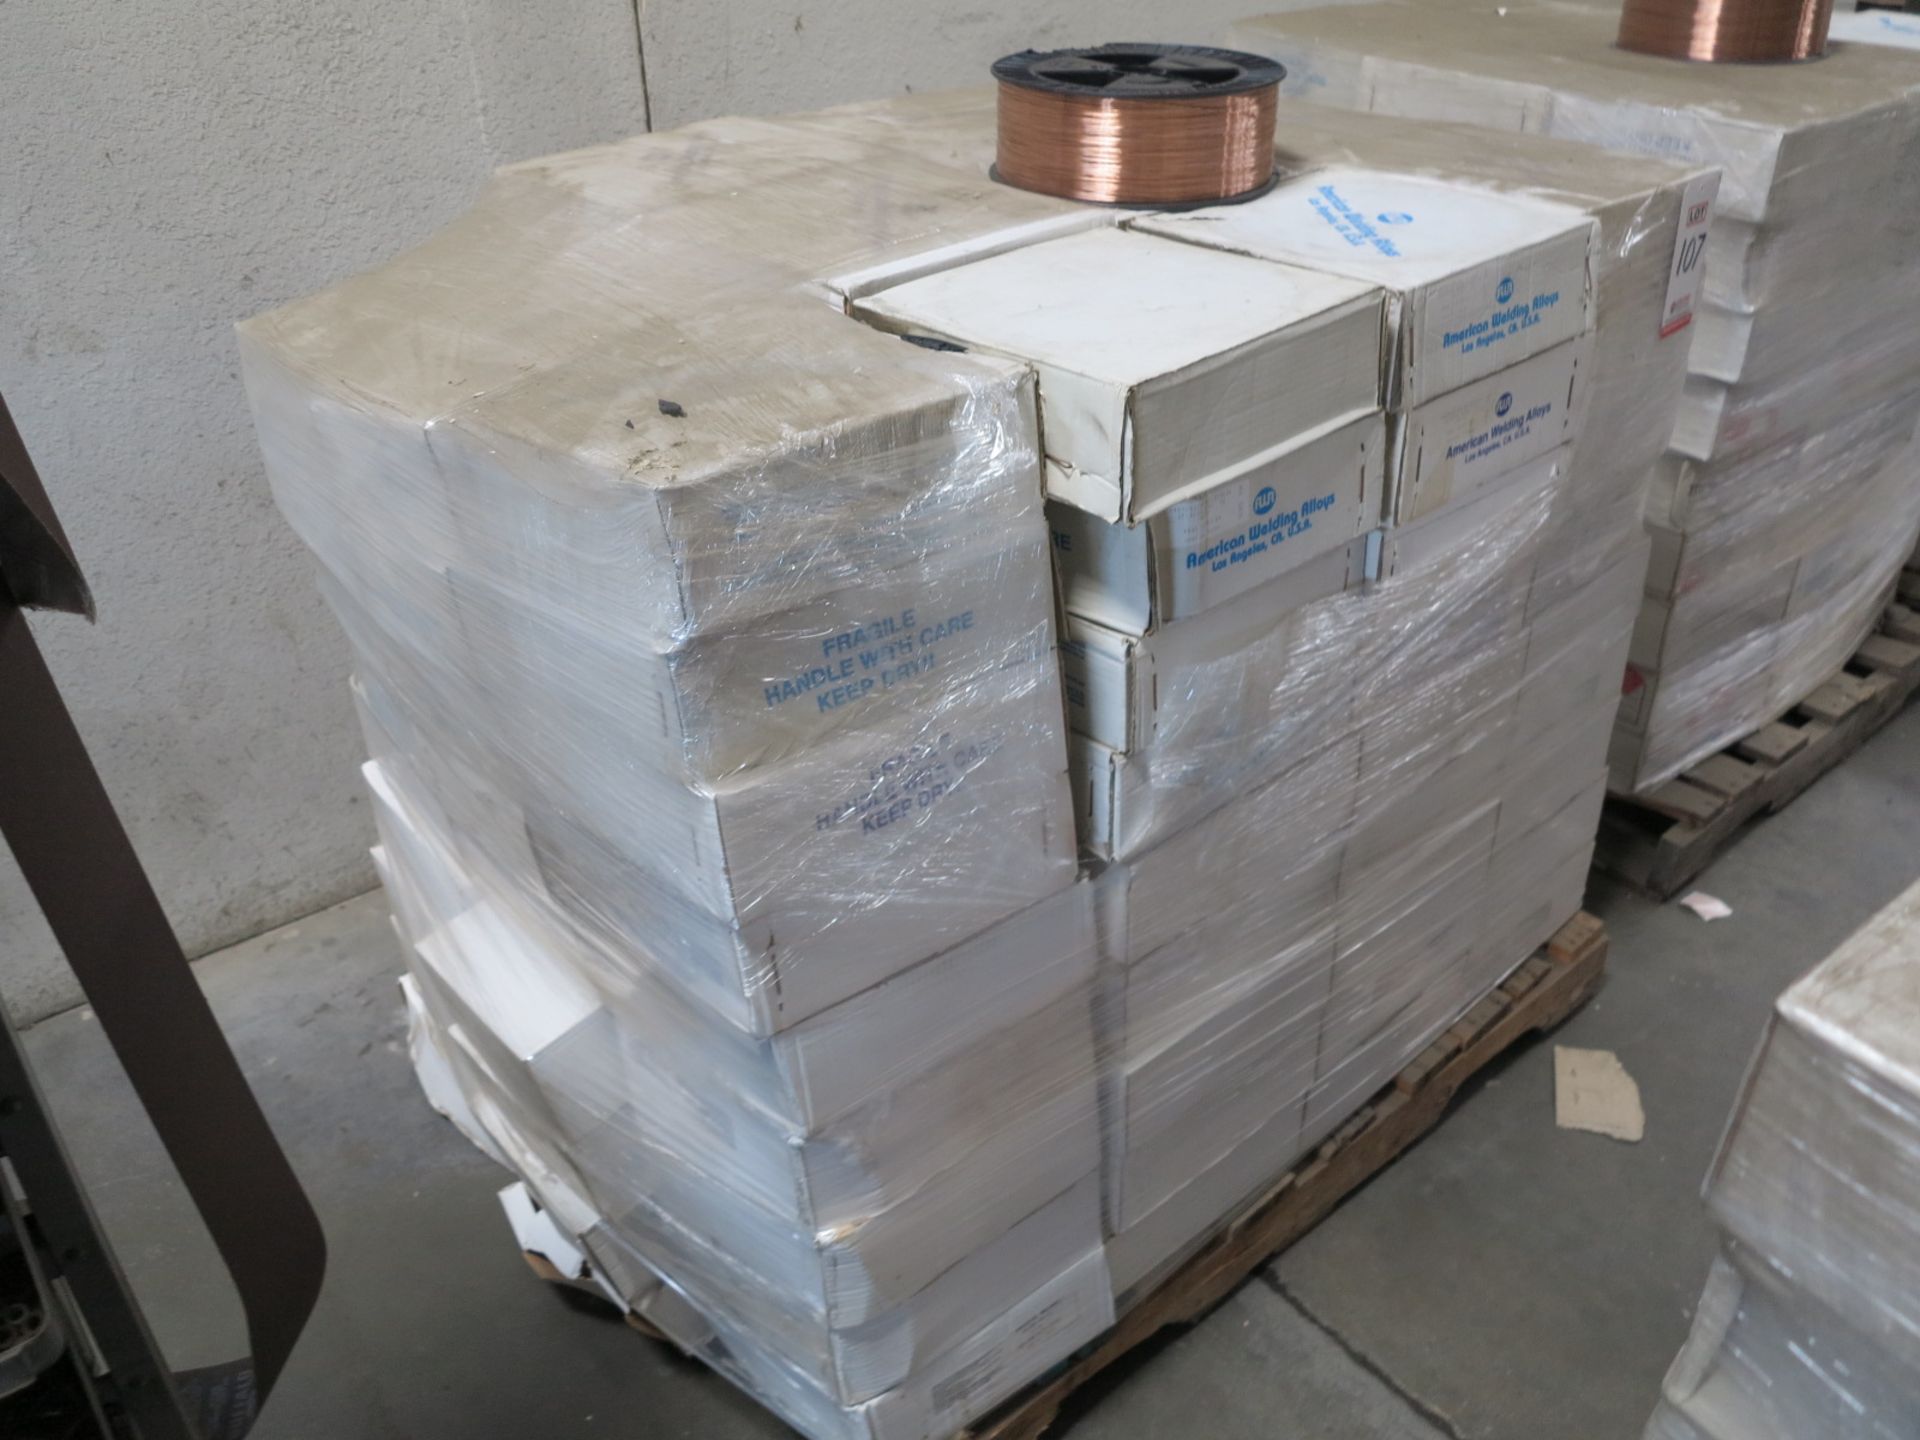 LOT - PALLET OF AMERICAN WELDING WIRE, S6, DIA. .035", 108 BOXES